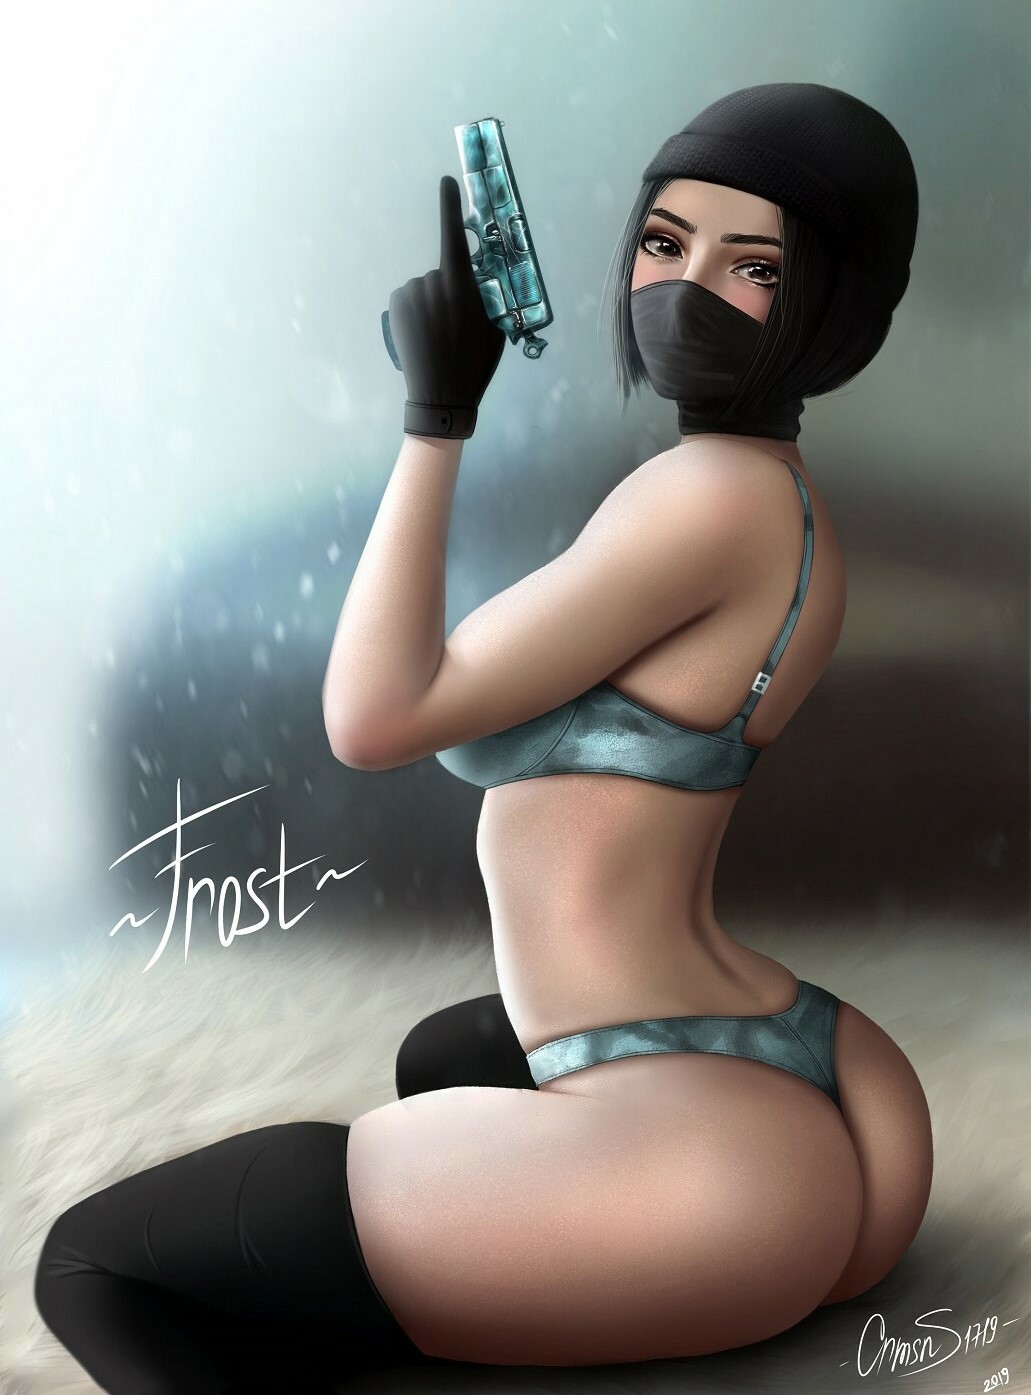 R6s Frost by CrmsnS 1719. 